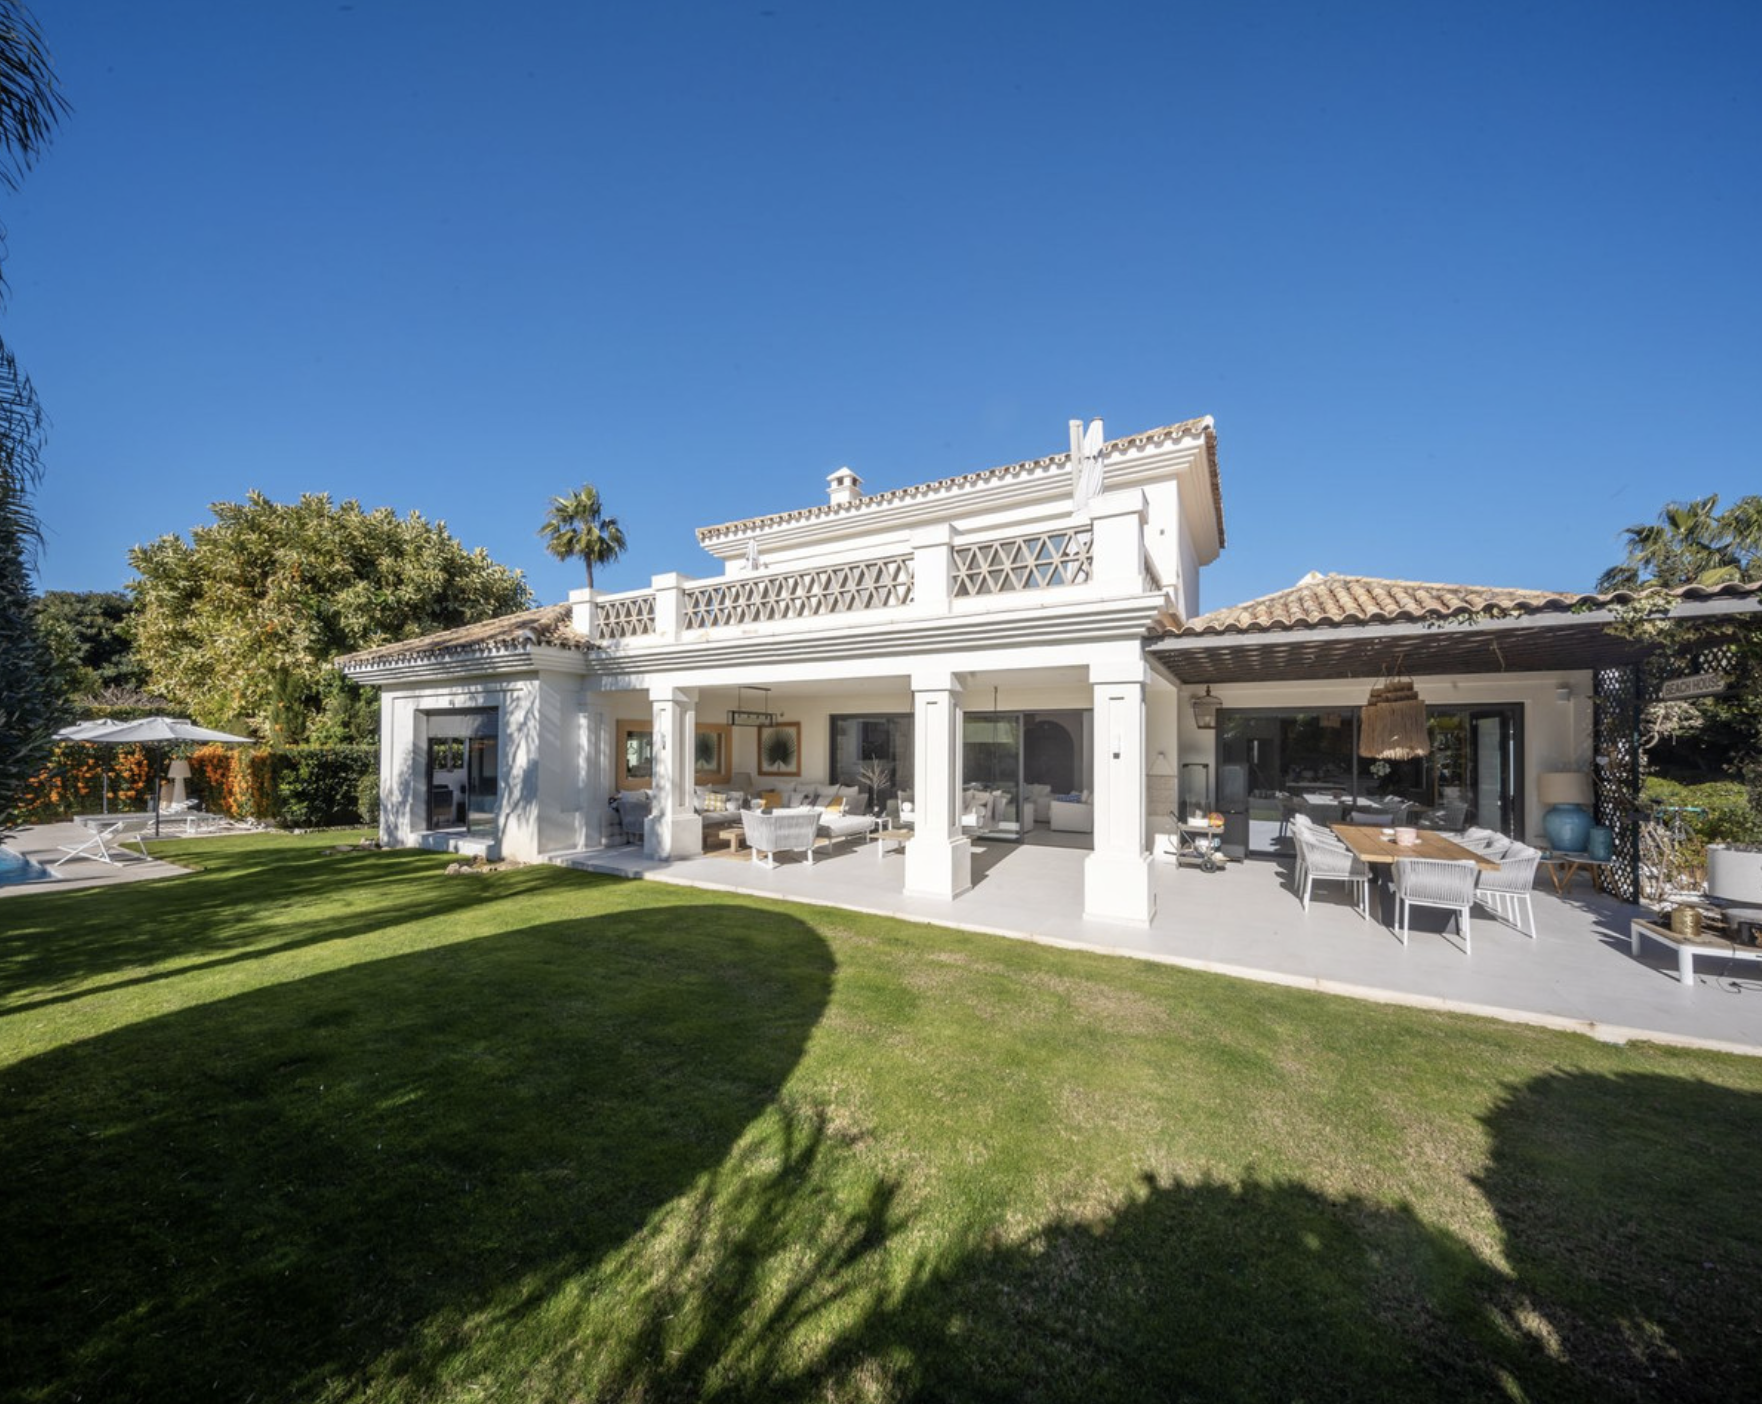 Immaculate and completely refurbished villa a few steps from the beach in Guadalmina Baja